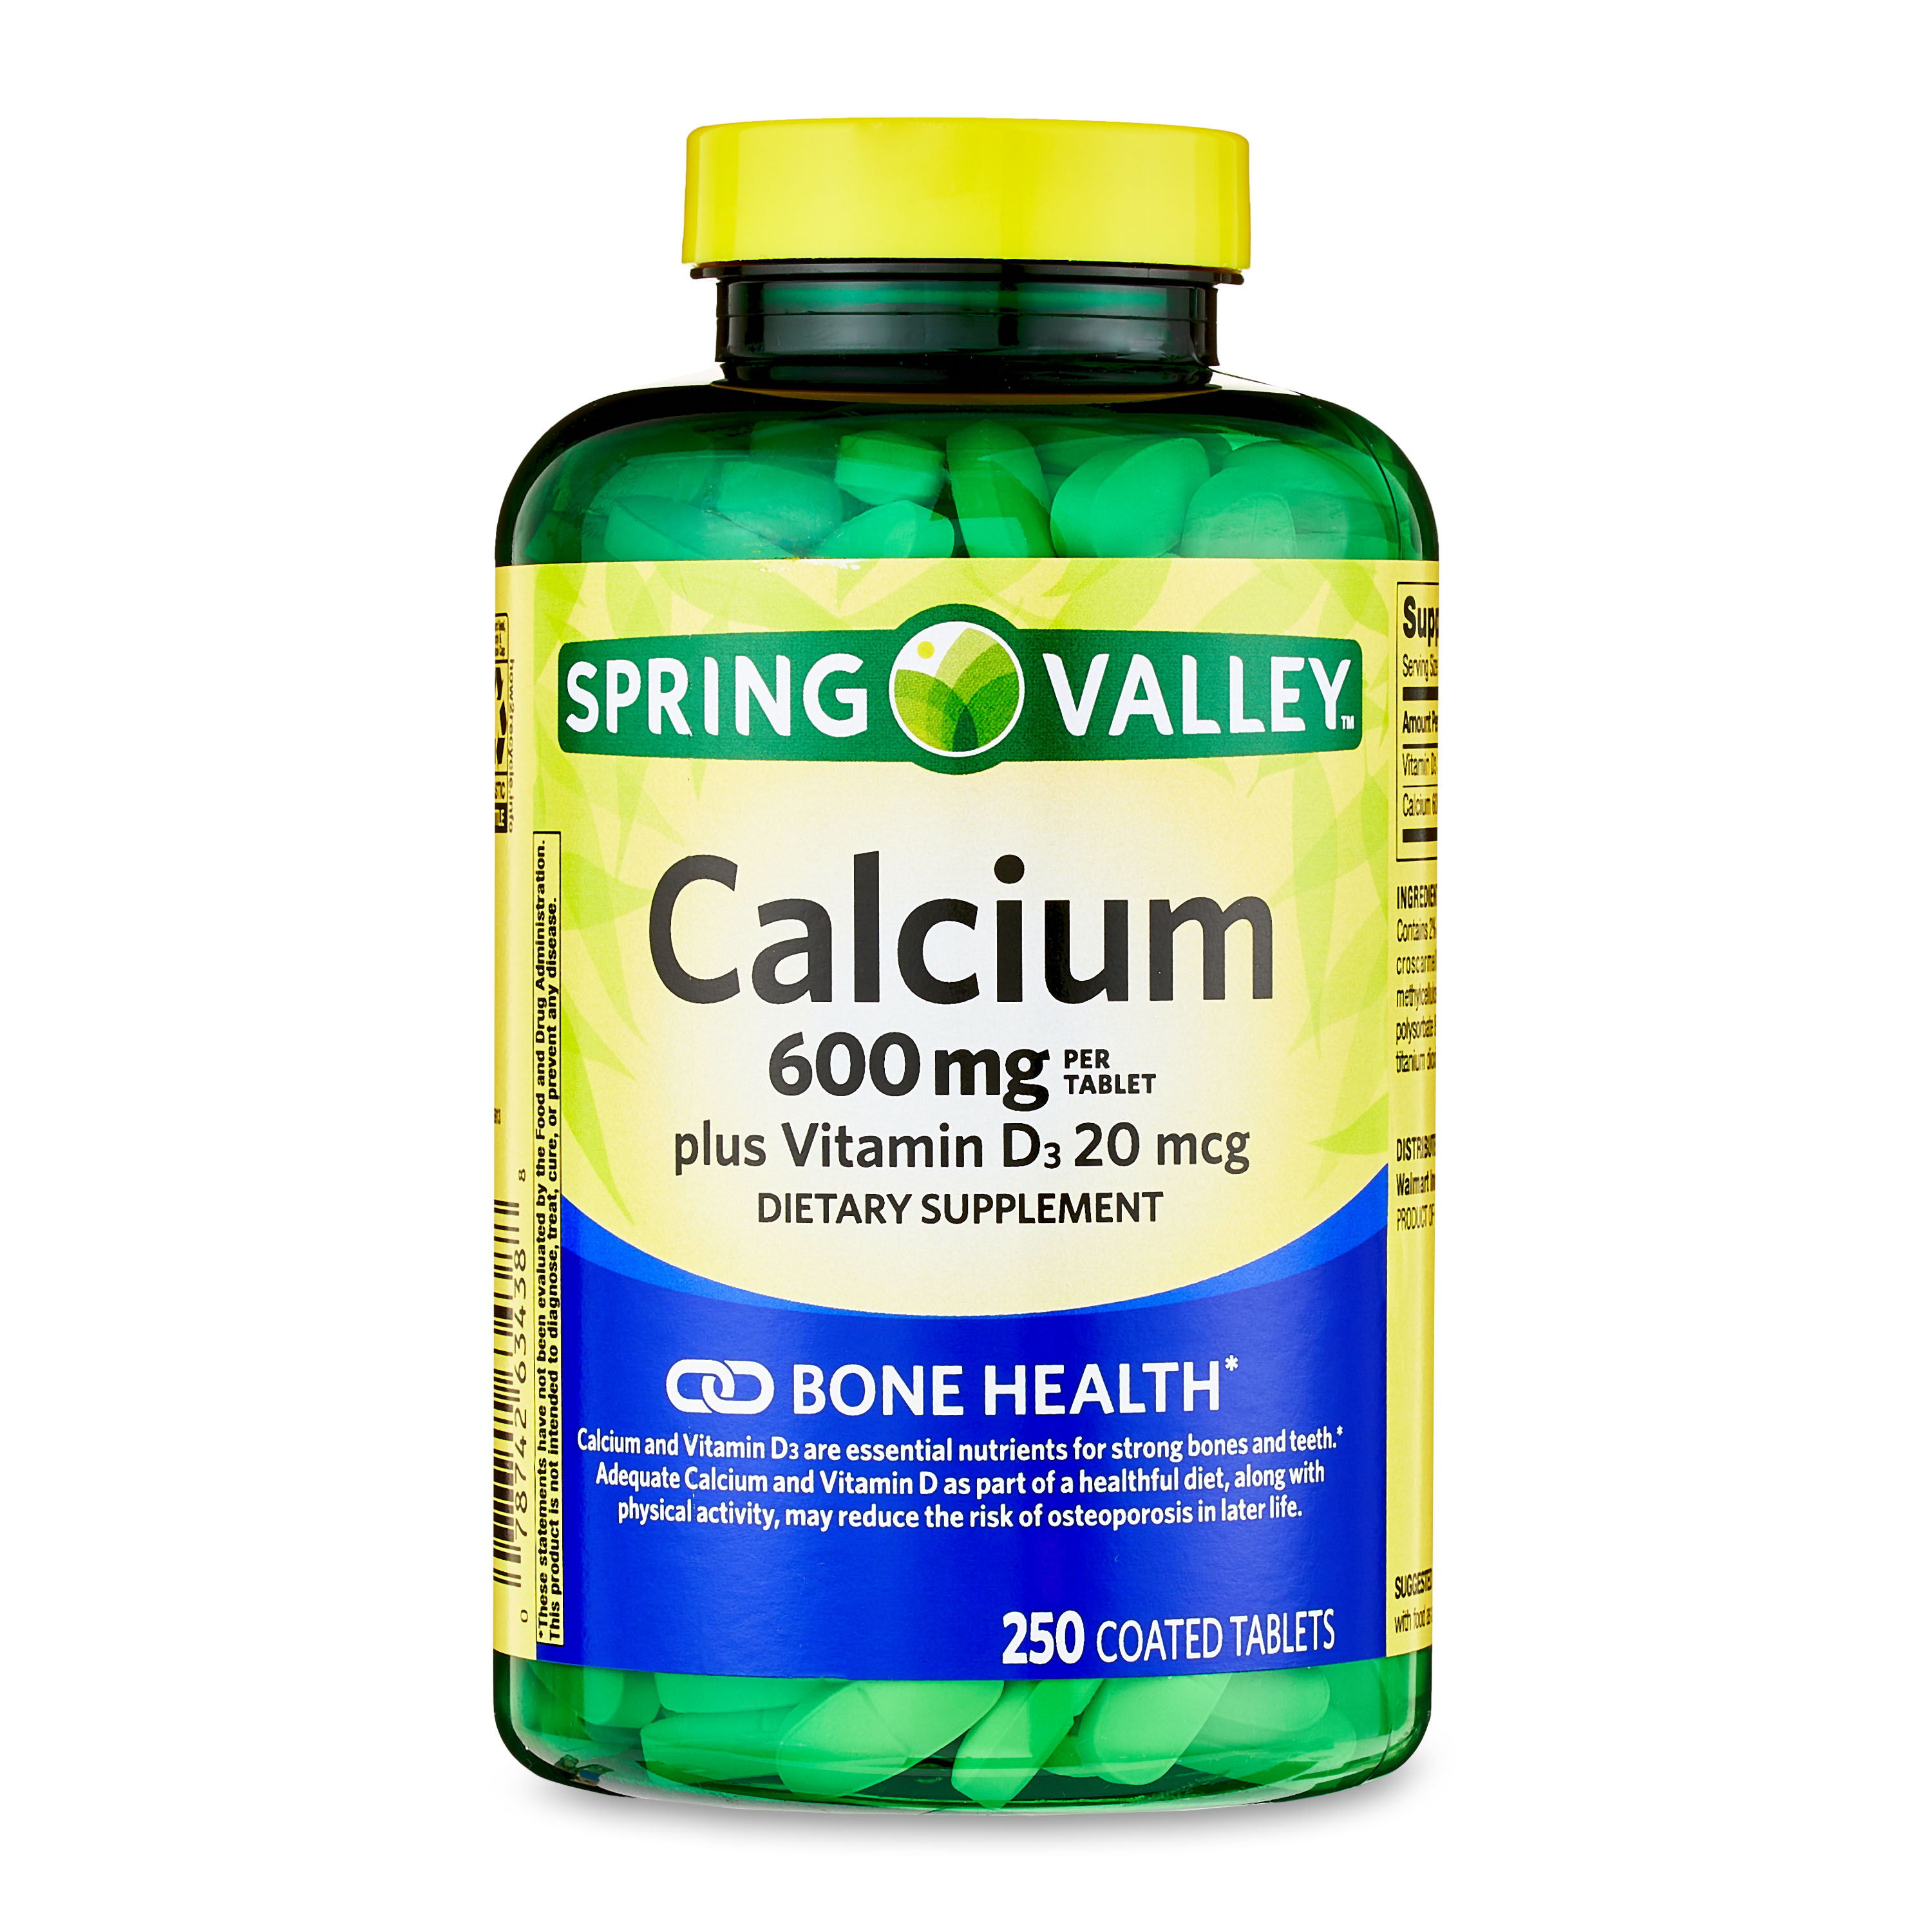 Spring Valley Calcium Plus Vitamin D Tablets Dietary Supplement, 600 mg, 250 Count - image 1 of 9